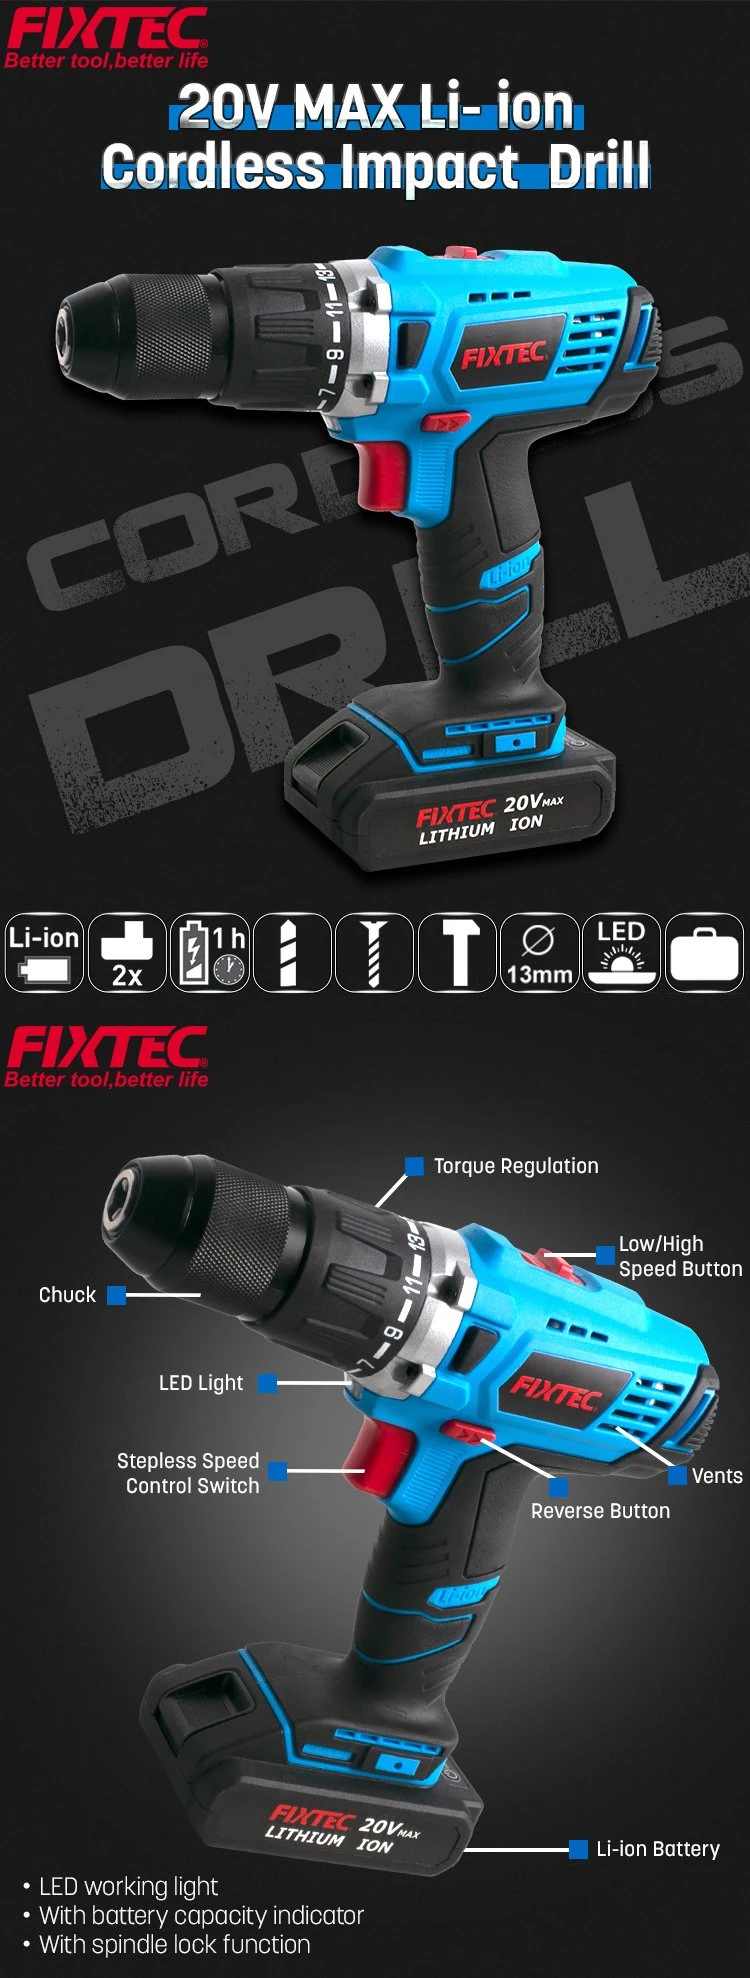 Fixtec Power Tools 20V Electric Hand Drill Cordless Drill with 2 Batteries